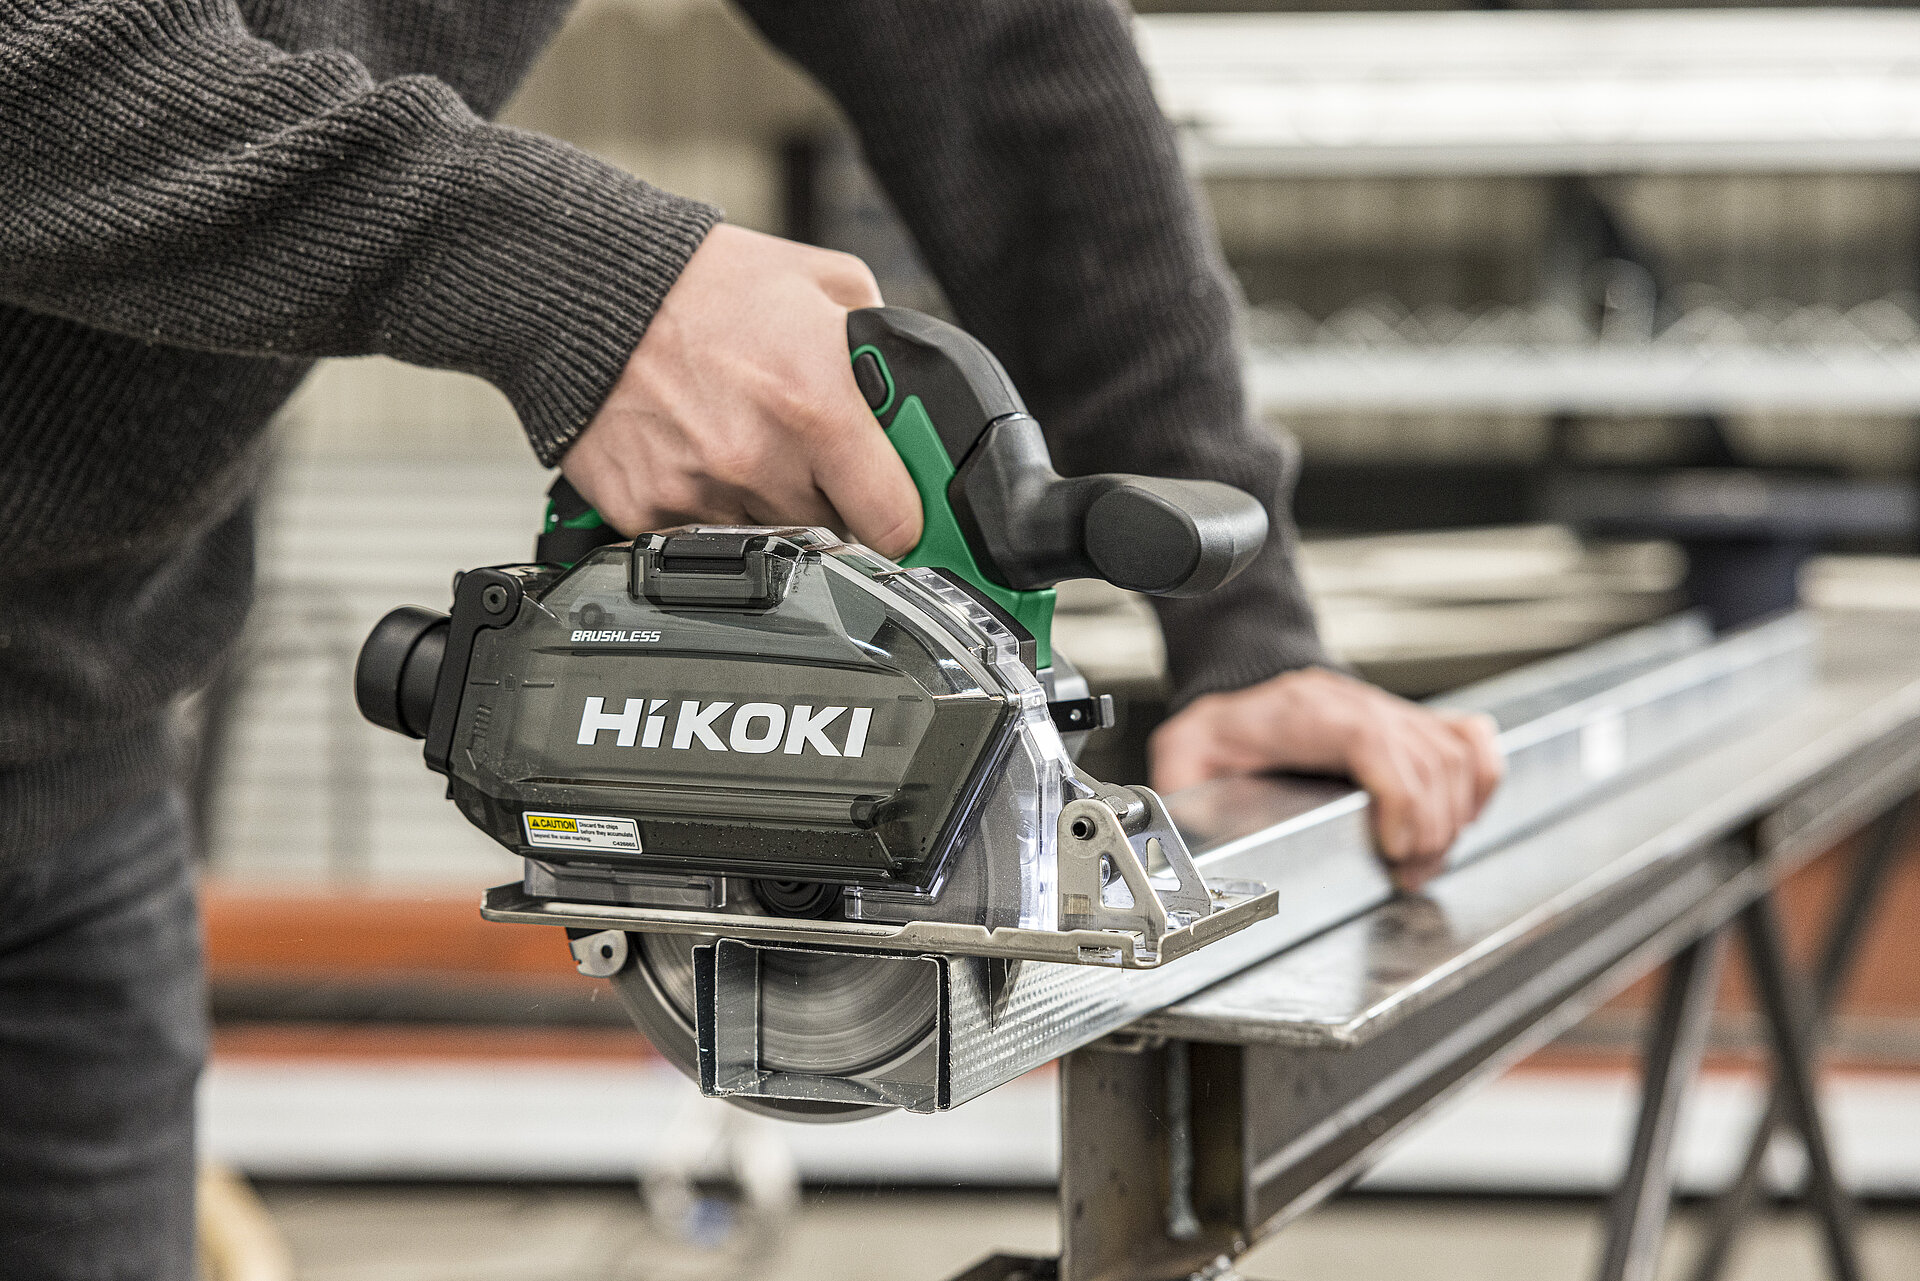 The CD3605DB cordless metal circular saw from HiKOKI is the fastest in its class